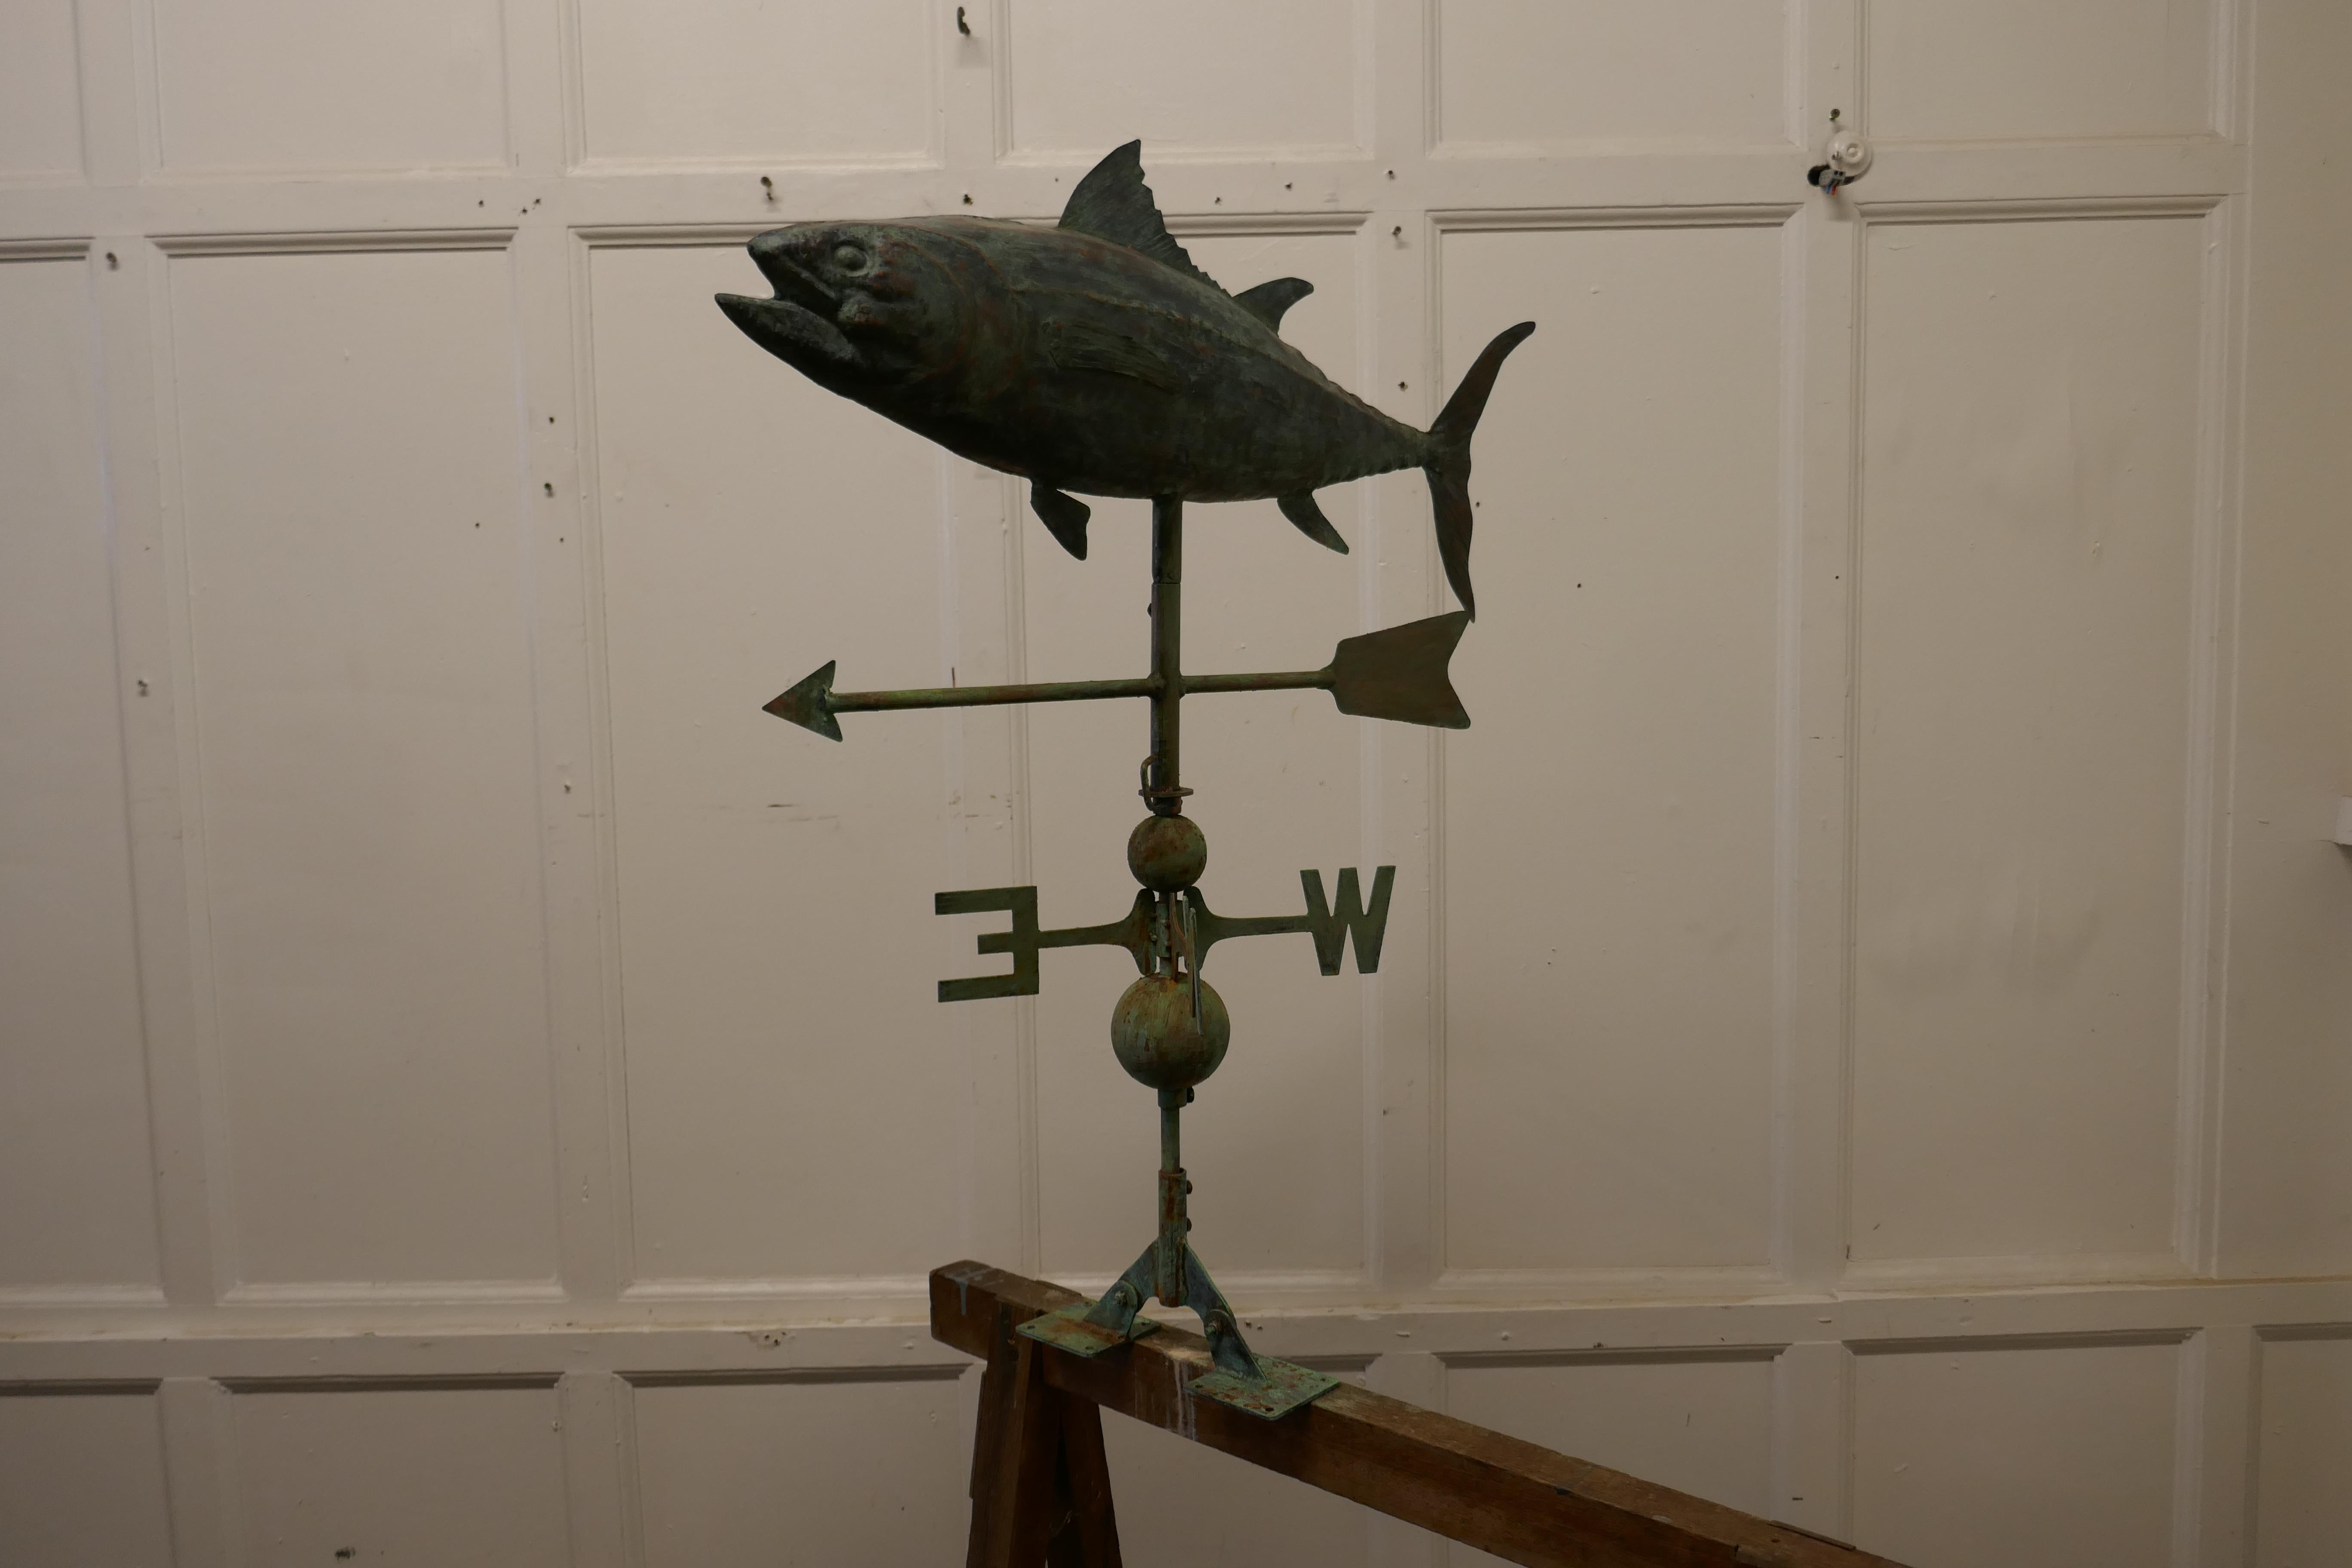 Verdigris copper folk art fish weather vane

The model Fish at the top of this Weathervane is hand made and finely detailed in its construction, it is mounted on a rod which has a fixing plate at the bottom
The vane is in good working condition